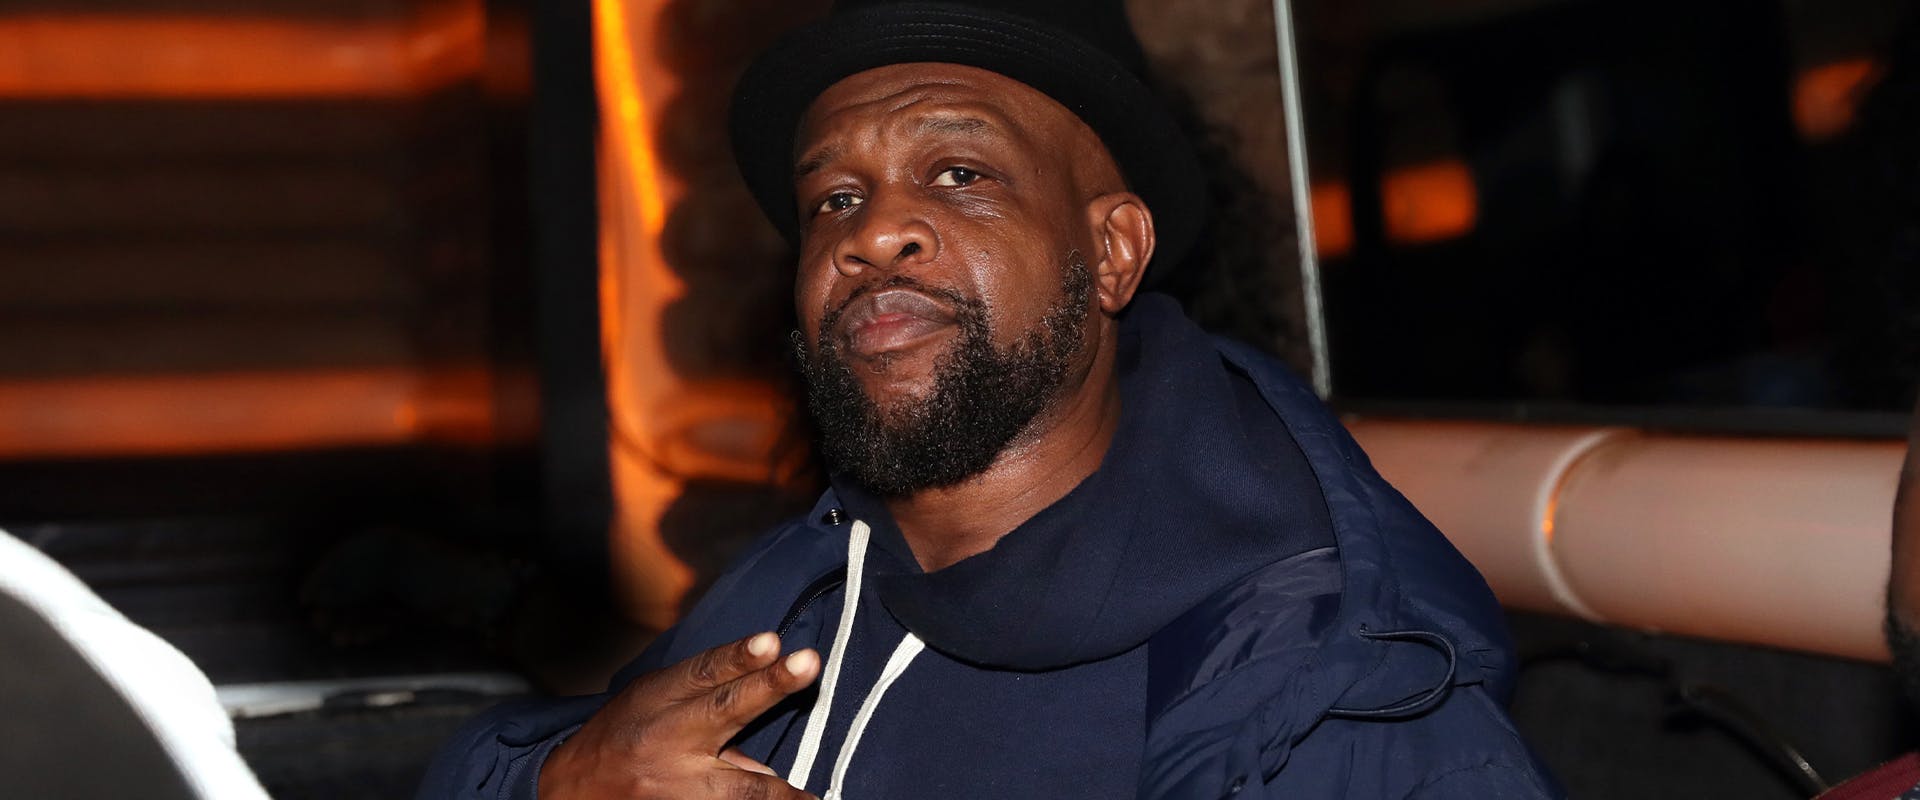 Jeru the Damaja attends Toca With Just Blaze And Talib Kweli at Cielo on December 11, 2018 in New York City. (Photo by Johnny Nunez/WireImage)